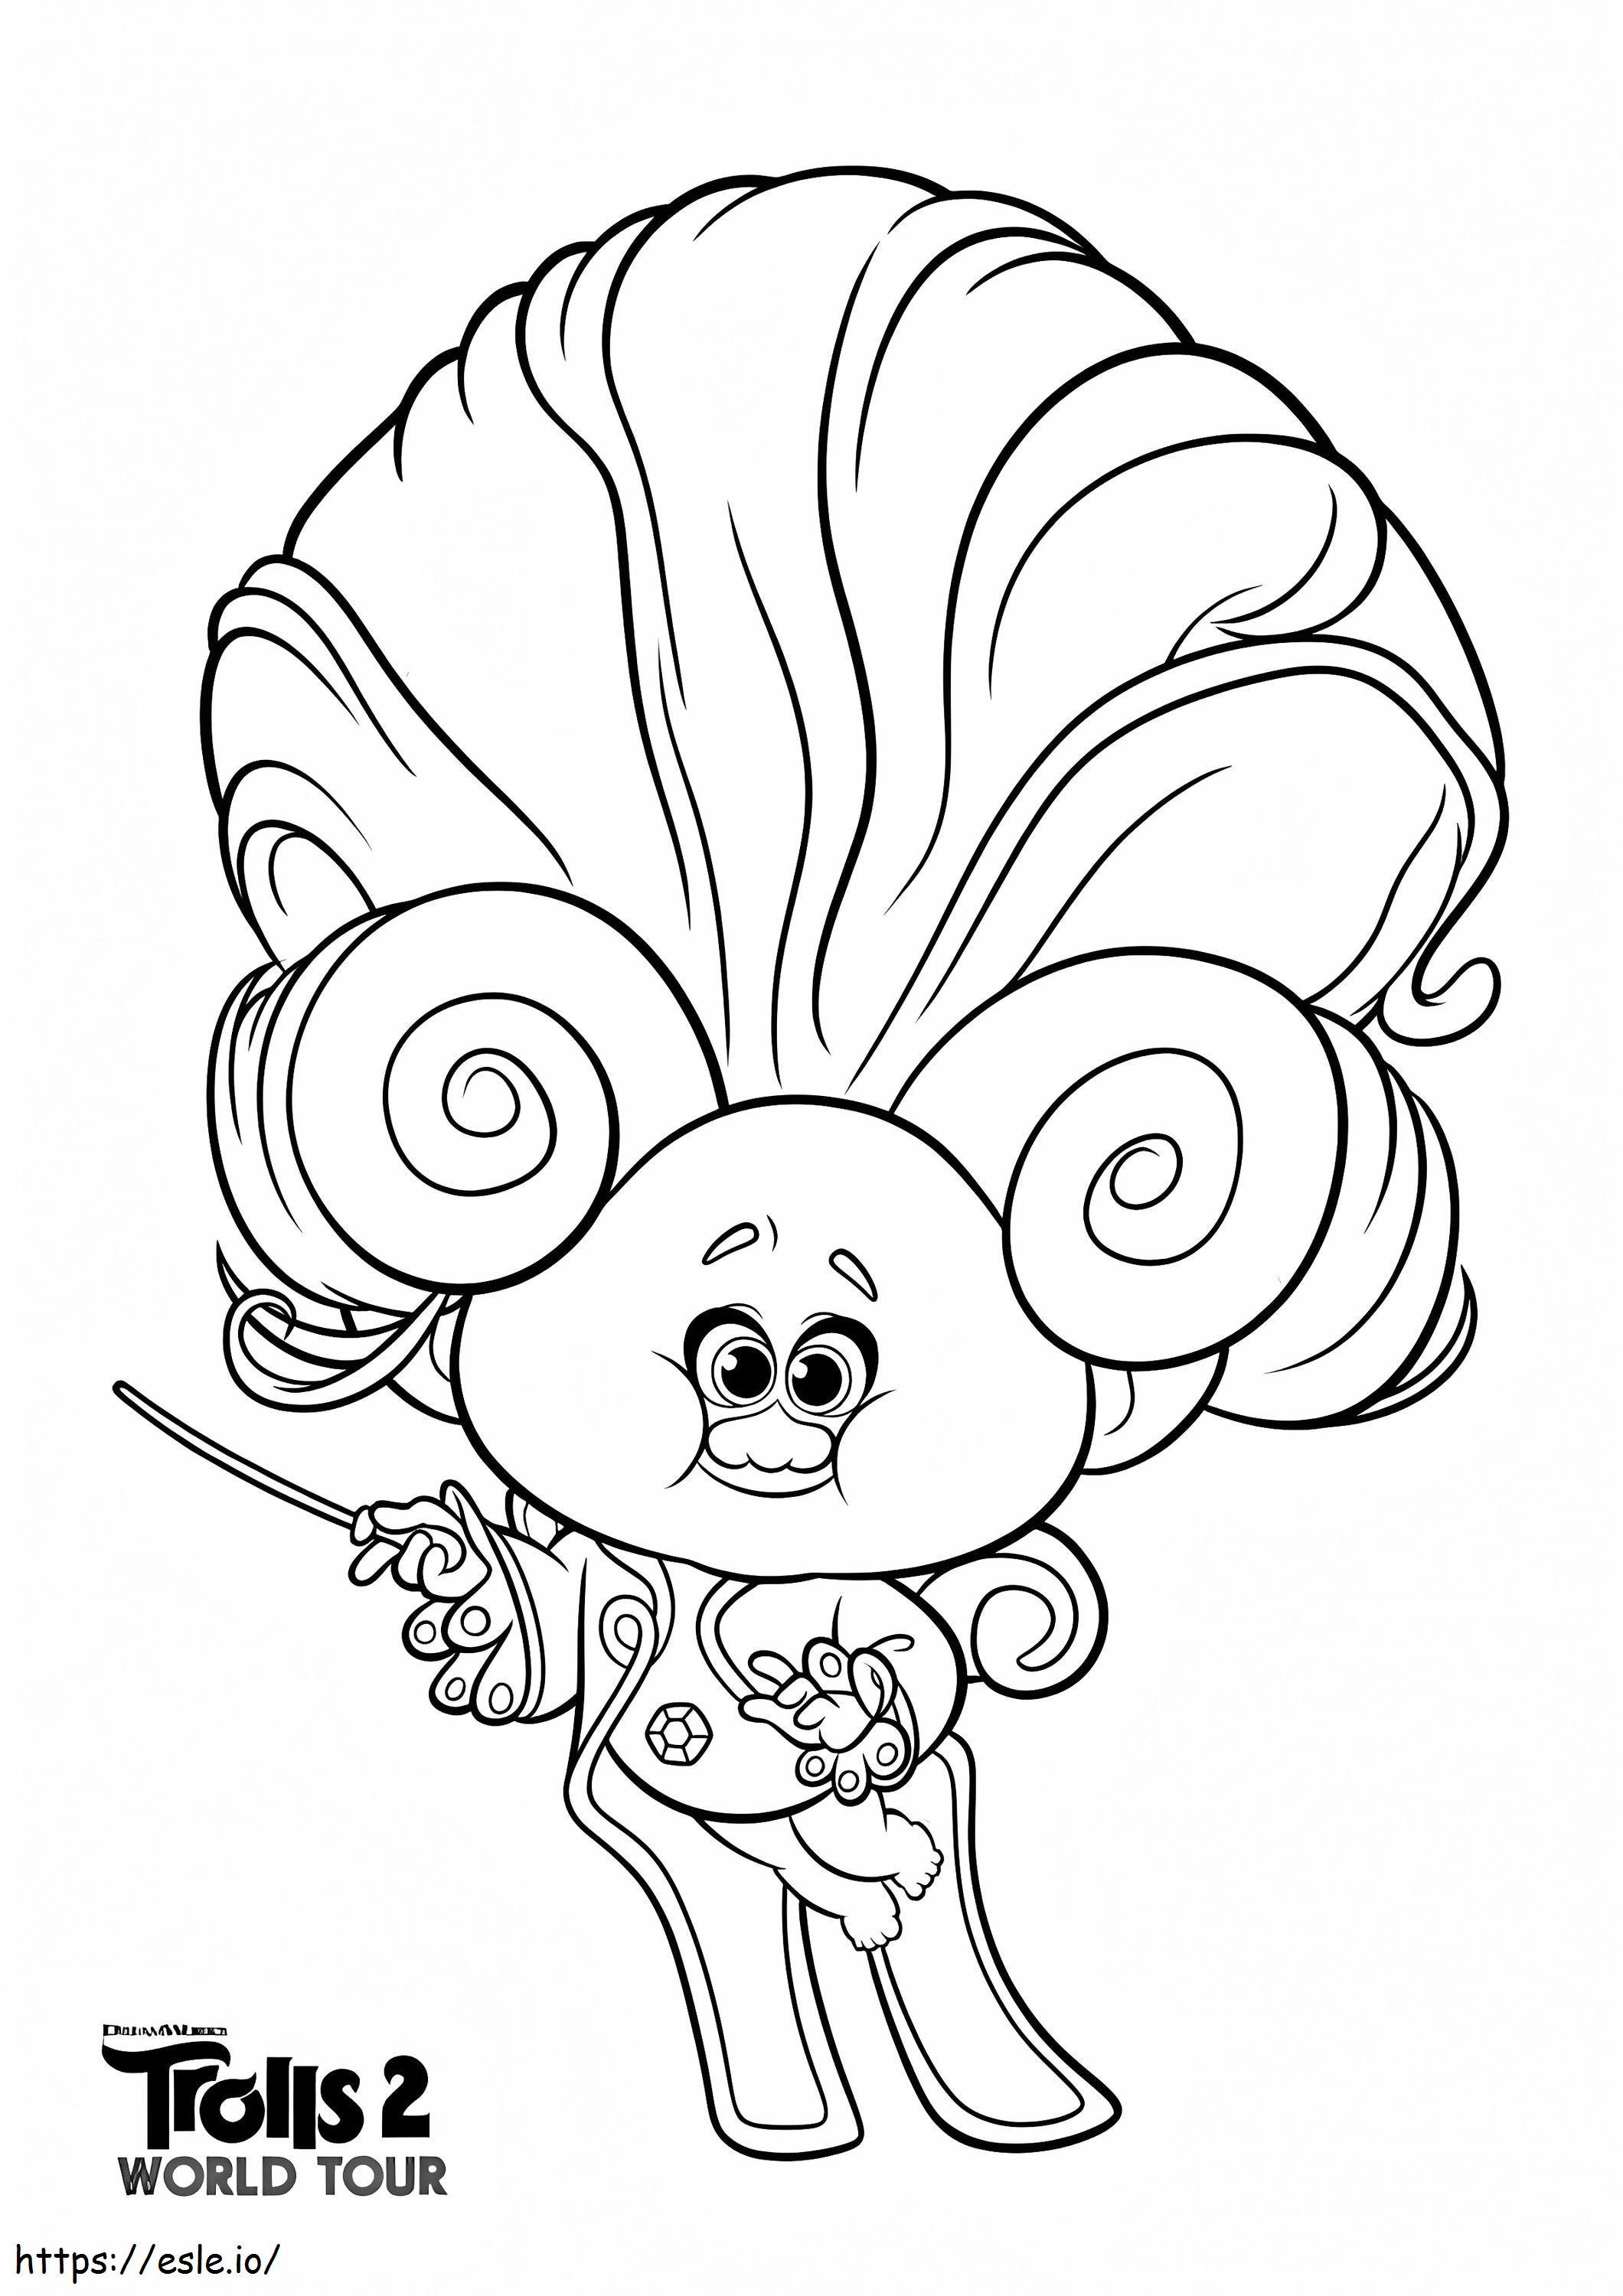 1588904944 Wonder Day Trolls World Tour 114 coloring page